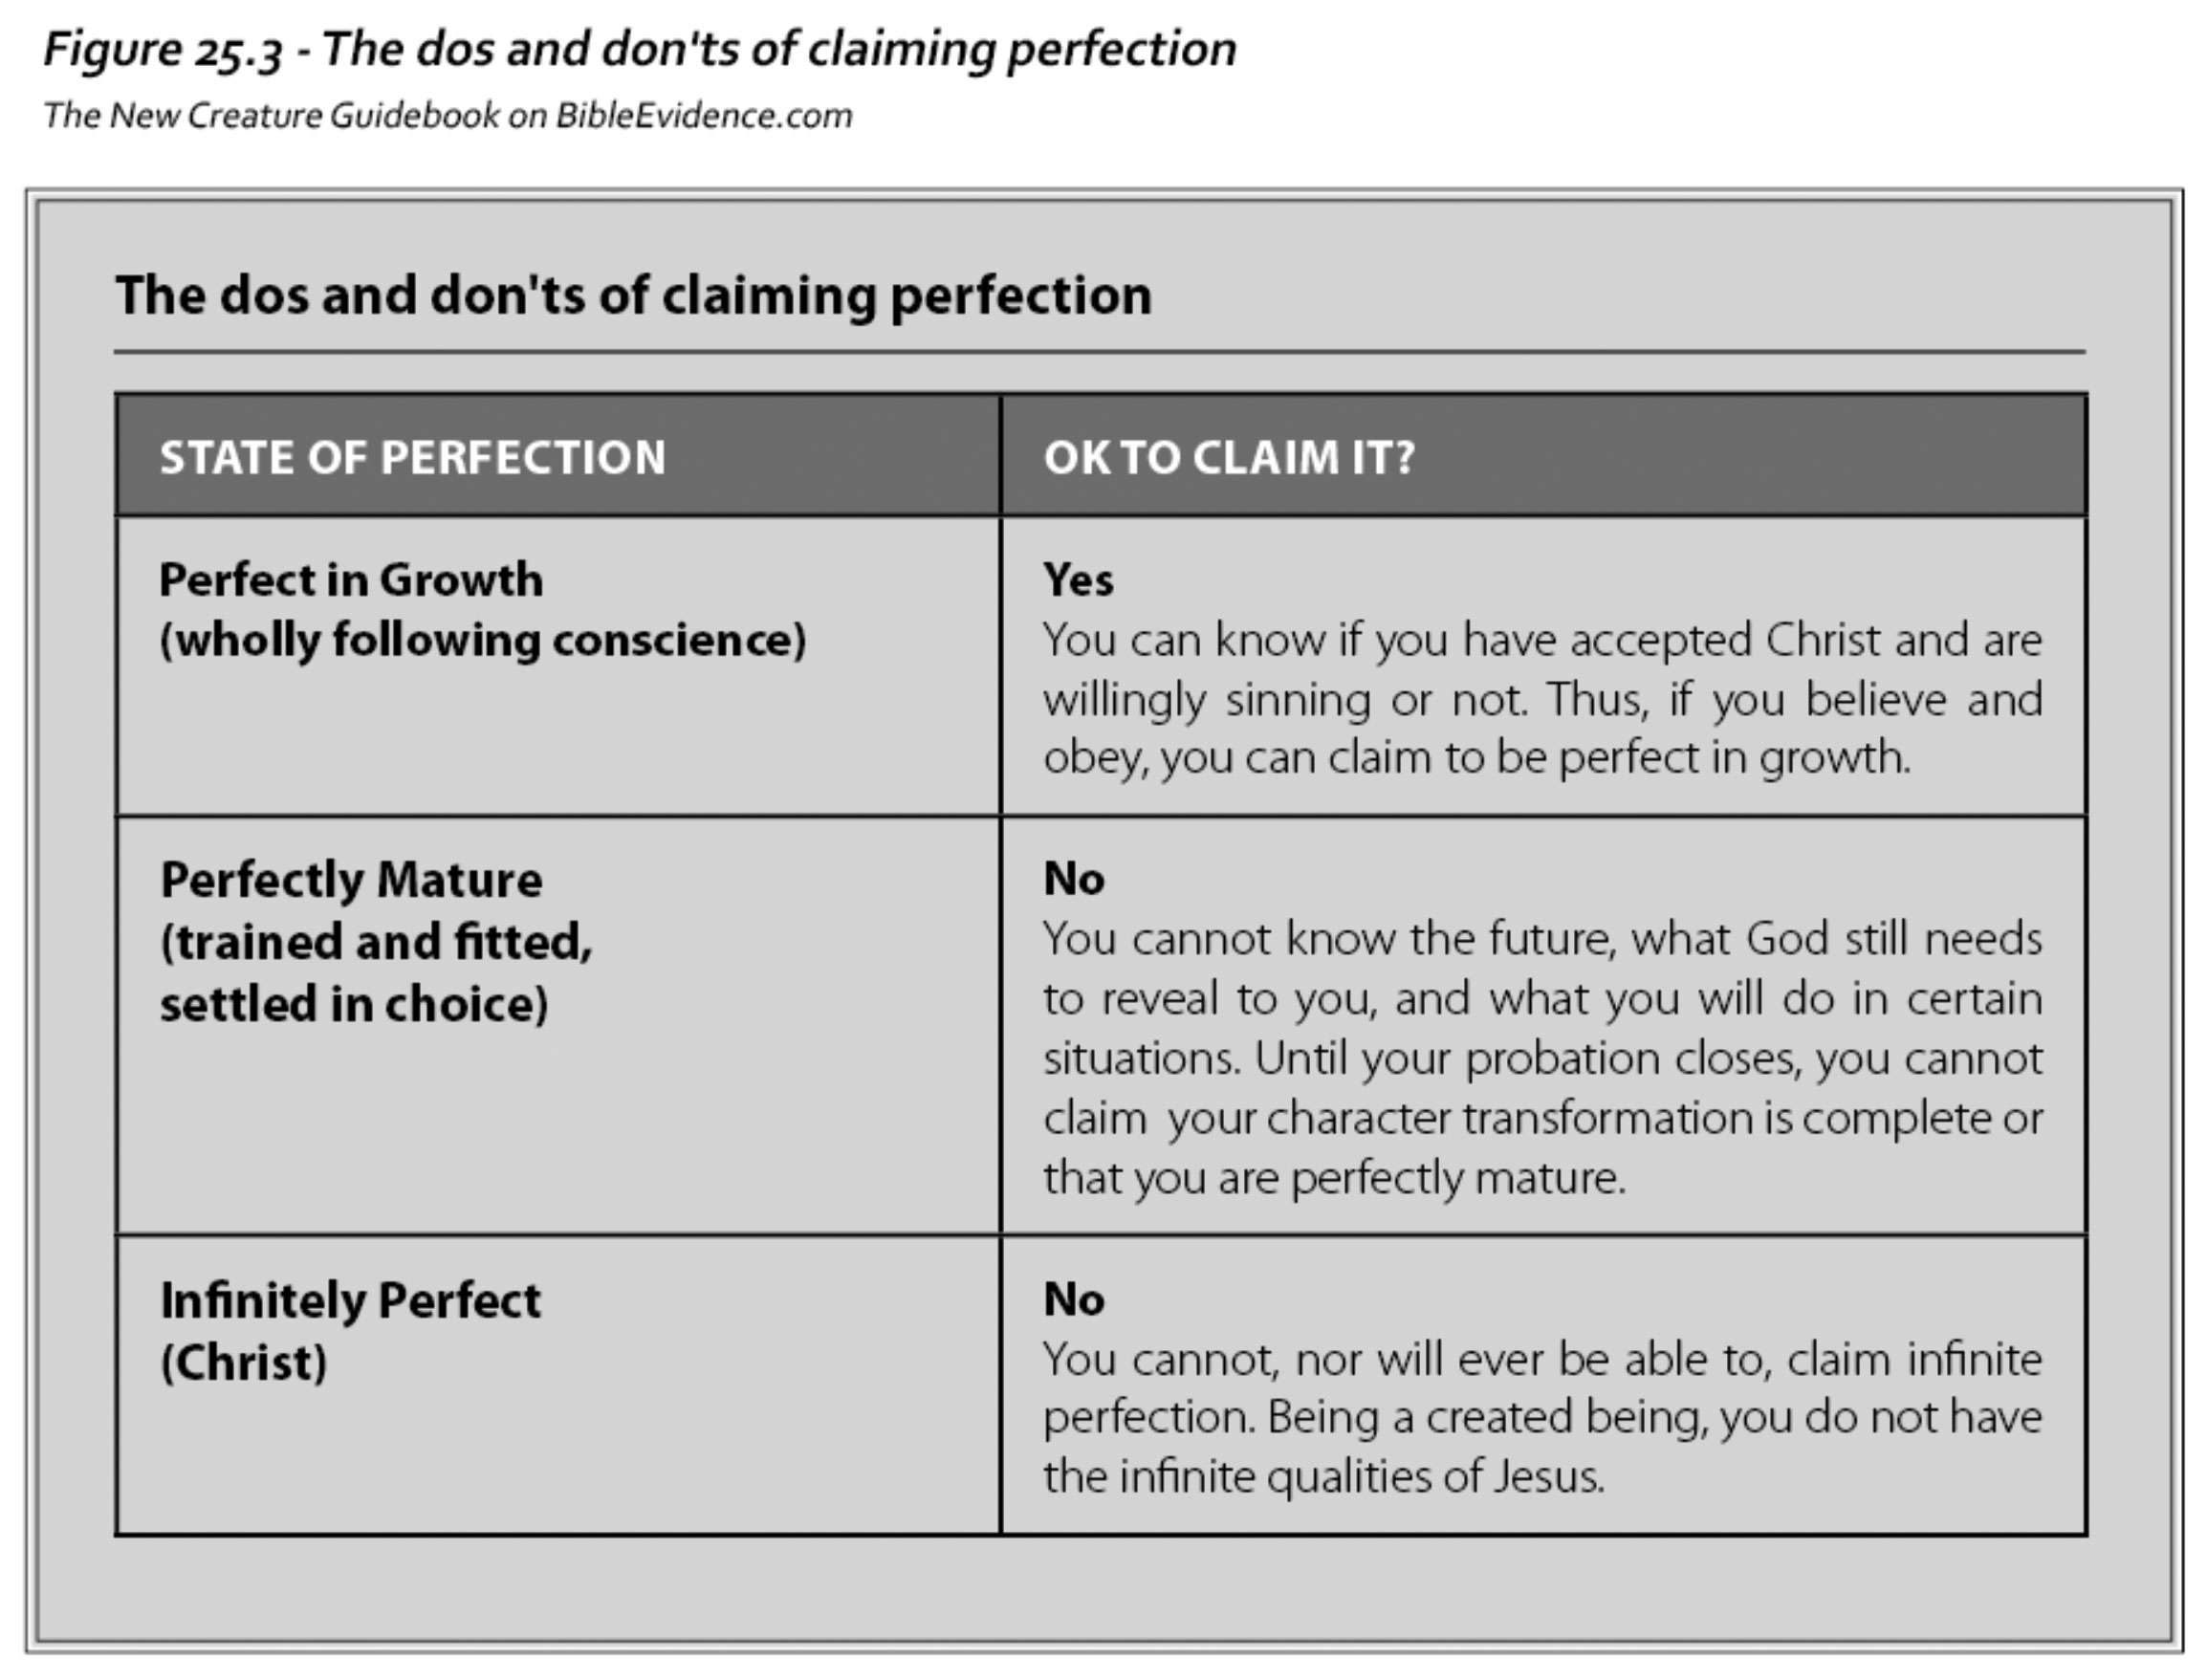 The Dos and Don'ts of Claiming Perfection